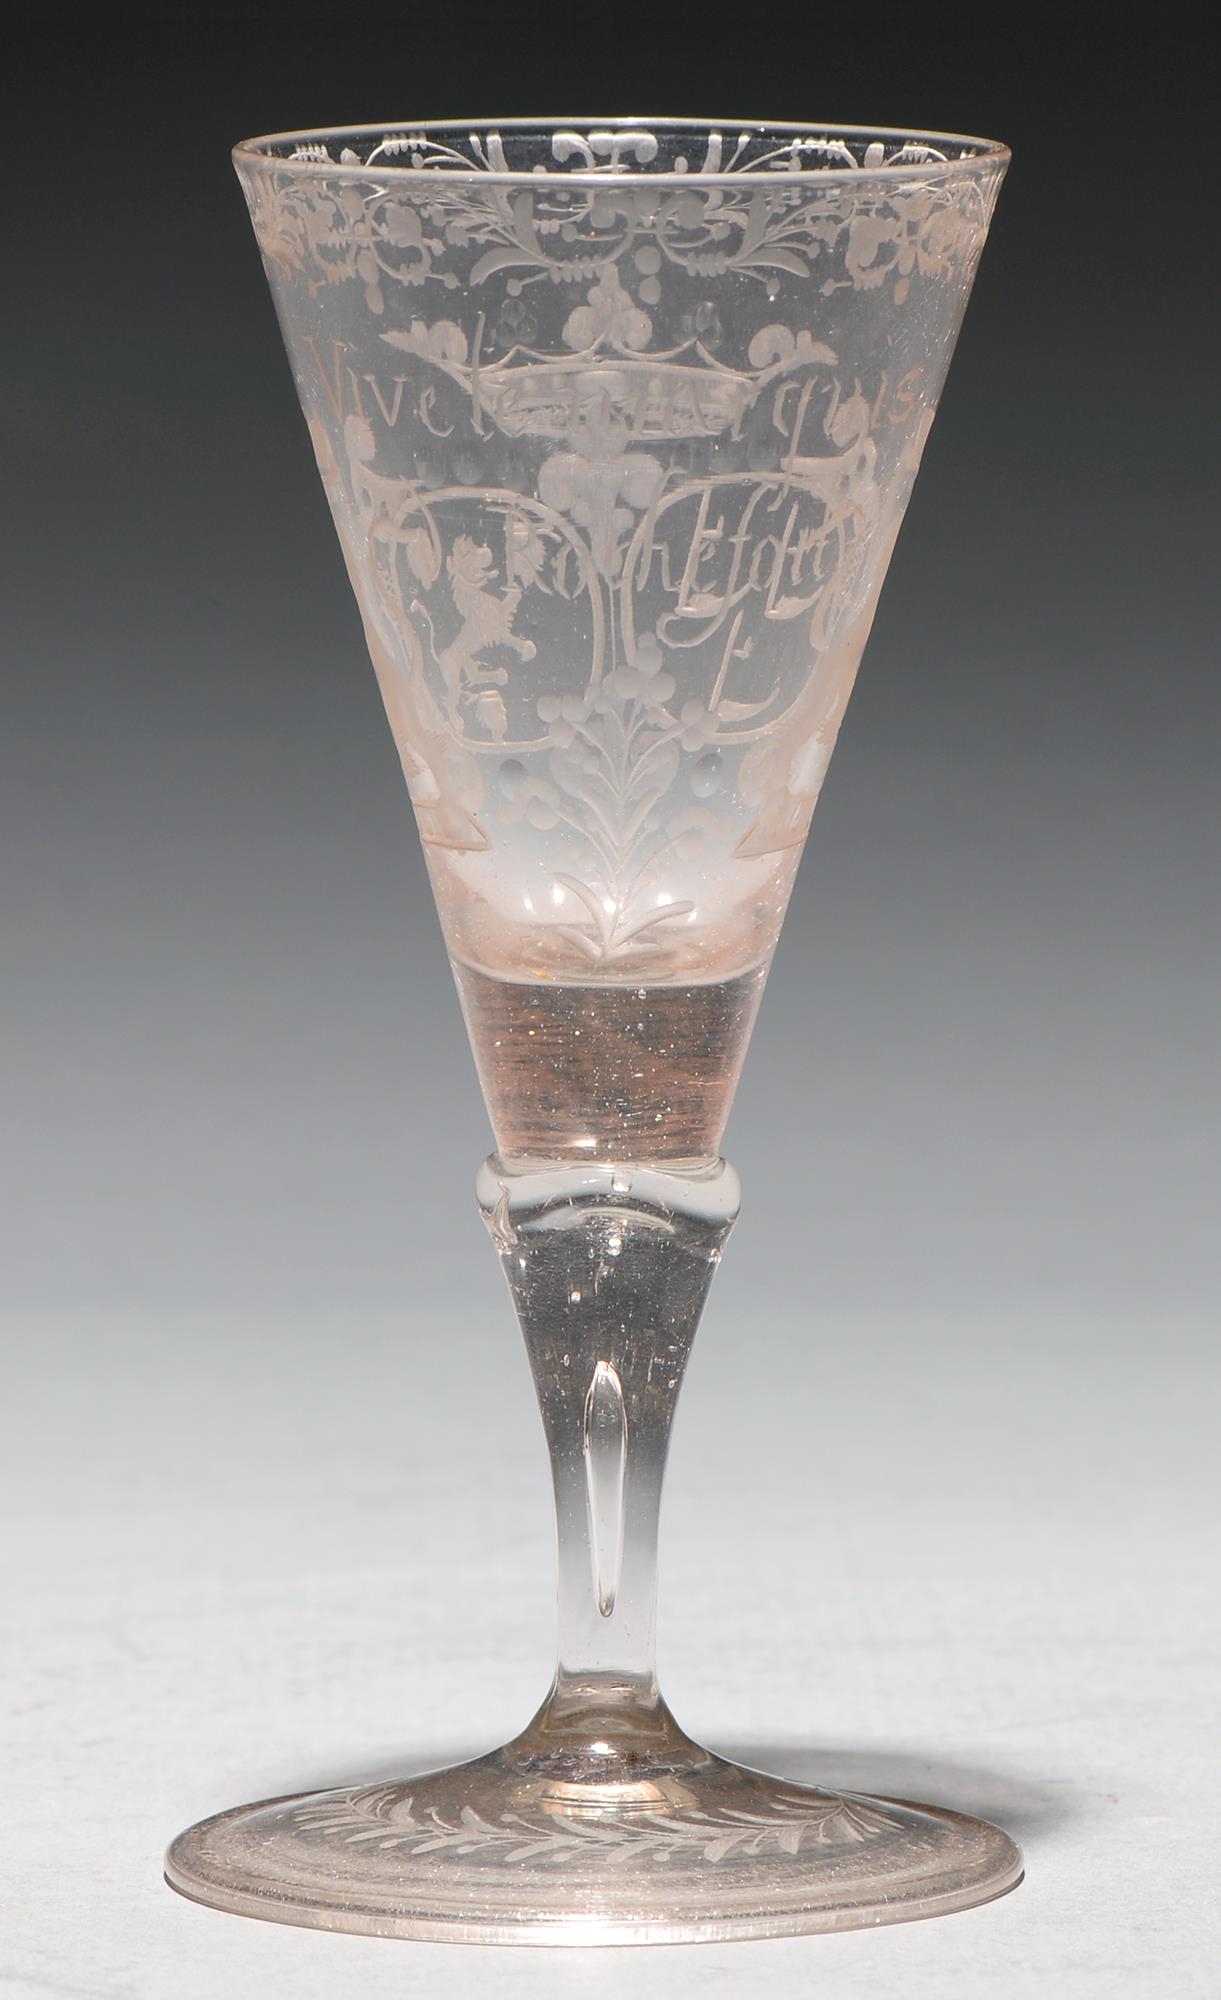 A German wine glass, 18th c, soda metal, engraved with two shields of arms, aquilegia??, coronet and